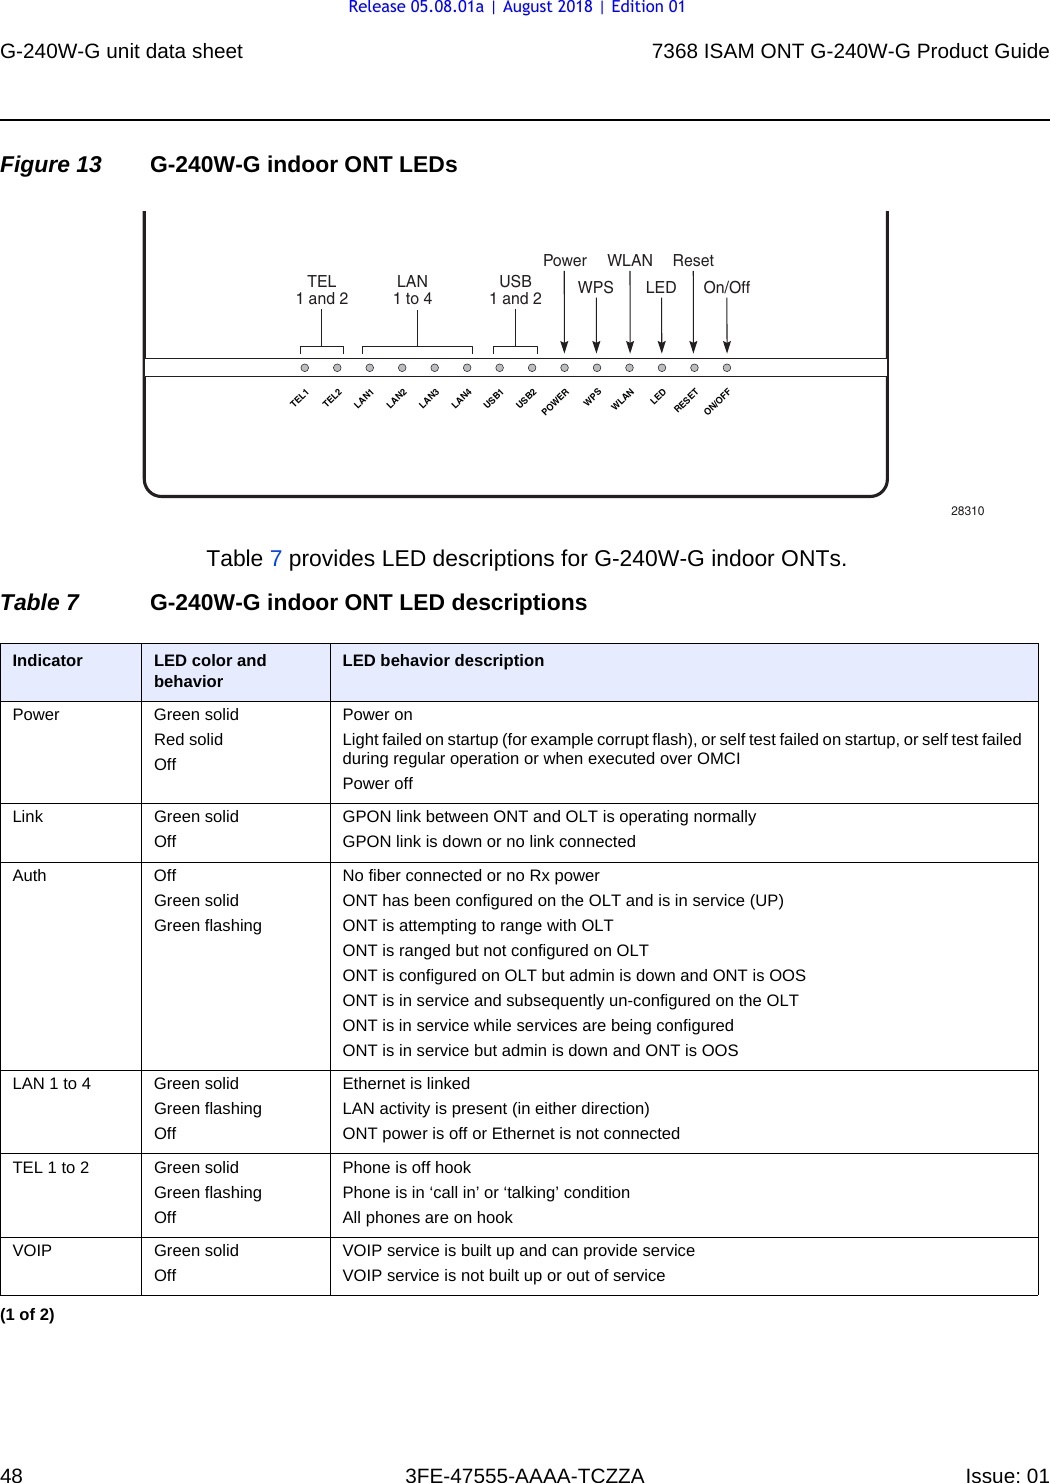 G-240W-G unit data sheet487368 ISAM ONT G-240W-G Product Guide3FE-47555-AAAA-TCZZA Issue: 01 Figure 13 G-240W-G indoor ONT LEDsTable 7 provides LED descriptions for G-240W-G indoor ONTs.Table 7 G-240W-G indoor ONT LED descriptionsUSB1 and 2Power WLANLAN1 to 428310TEL1TEL2LAN1LAN2LAN3LAN4USB1USB2POWE RWPSWLANLEDRESETON/OFFTEL1 and 2ResetWPSLED On/OffIndicator LED color and behavior LED behavior descriptionPower Green solidRed solidOffPower onLight failed on startup (for example corrupt flash), or self test failed on startup, or self test failed during regular operation or when executed over OMCIPower offLink Green solidOffGPON link between ONT and OLT is operating normallyGPON link is down or no link connectedAuth OffGreen solidGreen flashingNo fiber connected or no Rx powerONT has been configured on the OLT and is in service (UP)ONT is attempting to range with OLTONT is ranged but not configured on OLTONT is configured on OLT but admin is down and ONT is OOSONT is in service and subsequently un-configured on the OLTONT is in service while services are being configuredONT is in service but admin is down and ONT is OOSLAN 1 to 4 Green solidGreen flashingOffEthernet is linkedLAN activity is present (in either direction)ONT power is off or Ethernet is not connectedTEL 1 to 2 Green solidGreen flashingOffPhone is off hookPhone is in ‘call in’ or ‘talking’ conditionAll phones are on hookVOIP Green solidOffVOIP service is built up and can provide serviceVOIP service is not built up or out of service(1 of 2)Release 05.08.01a | August 2018 | Edition 01